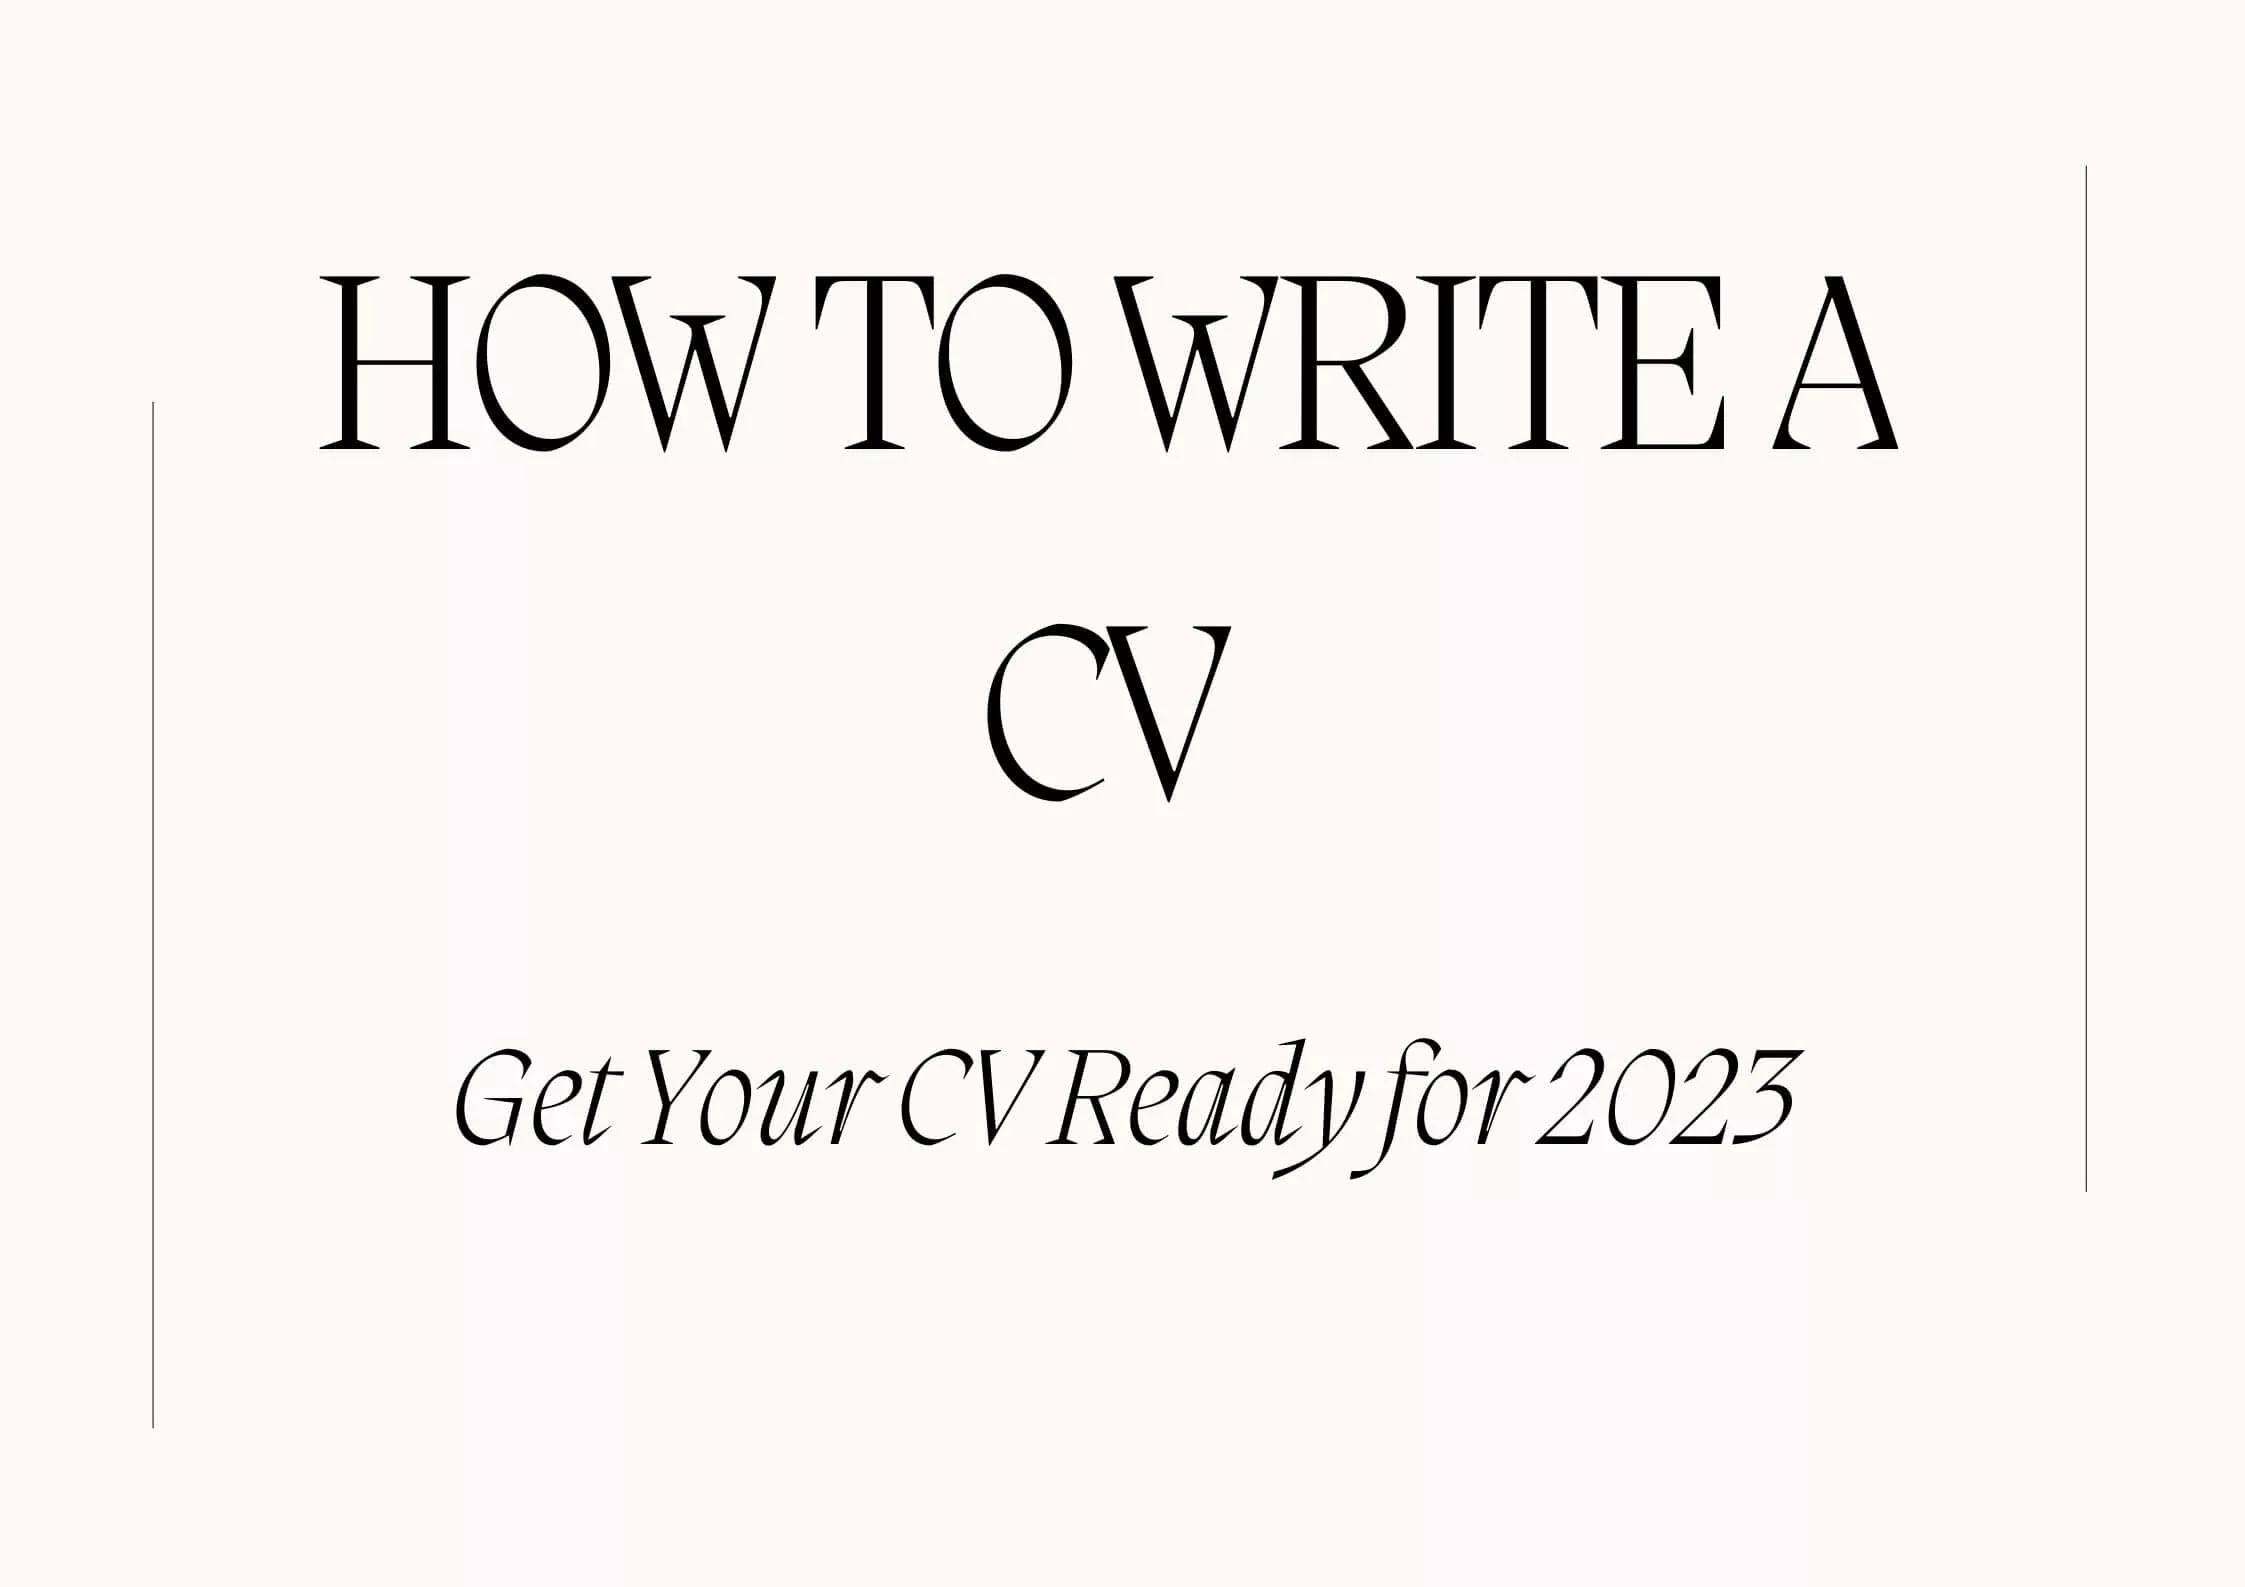 How to Write a CV: Get Your Curriculum Vitae Ready for 2023